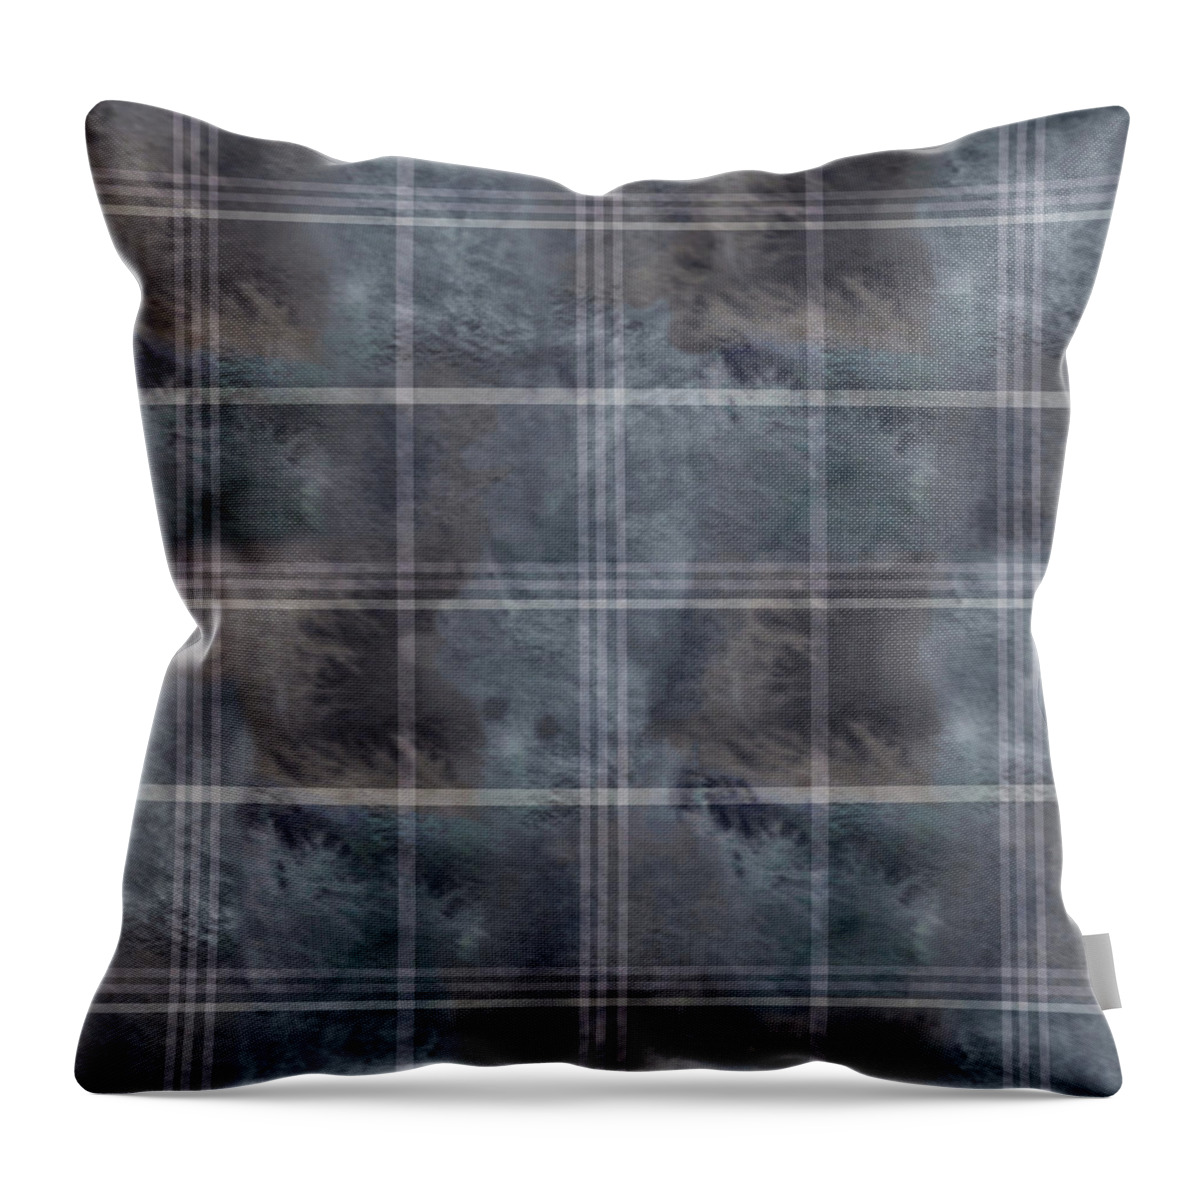 Pattern Throw Pillow featuring the digital art Moody Blue Plaid by Sand And Chi